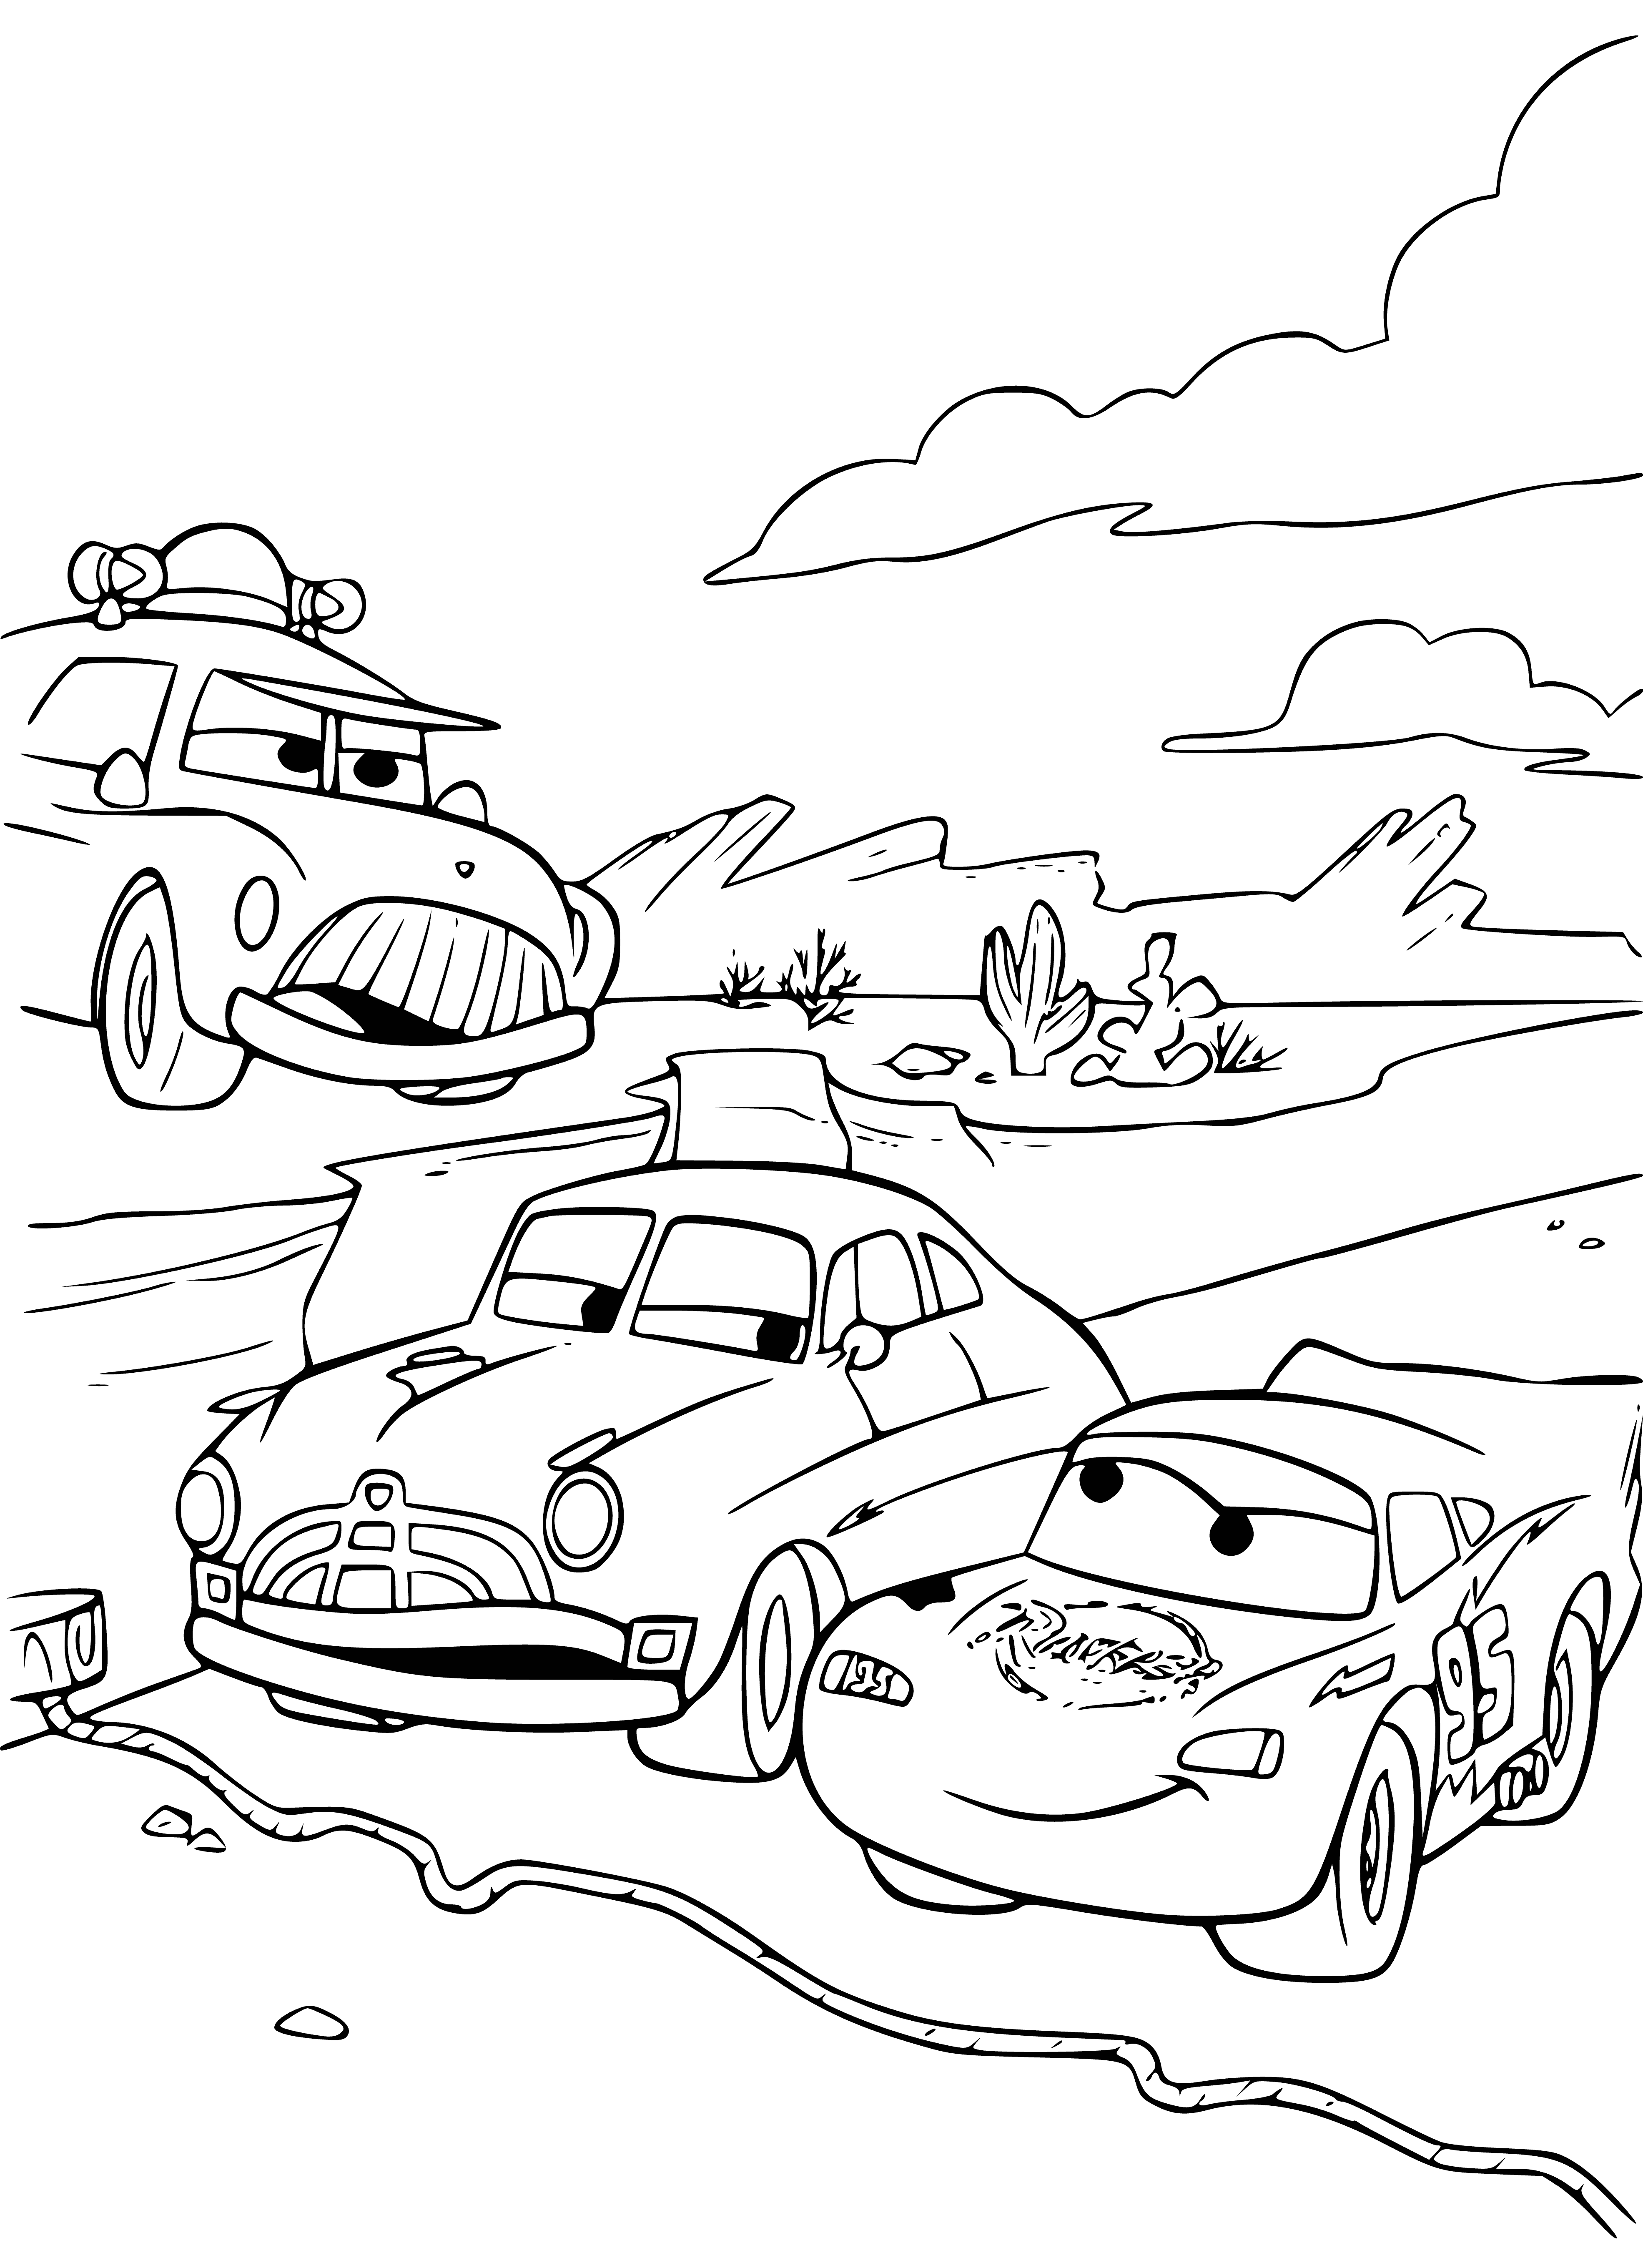 Doc Hudson and Lightning McQueen coloring page